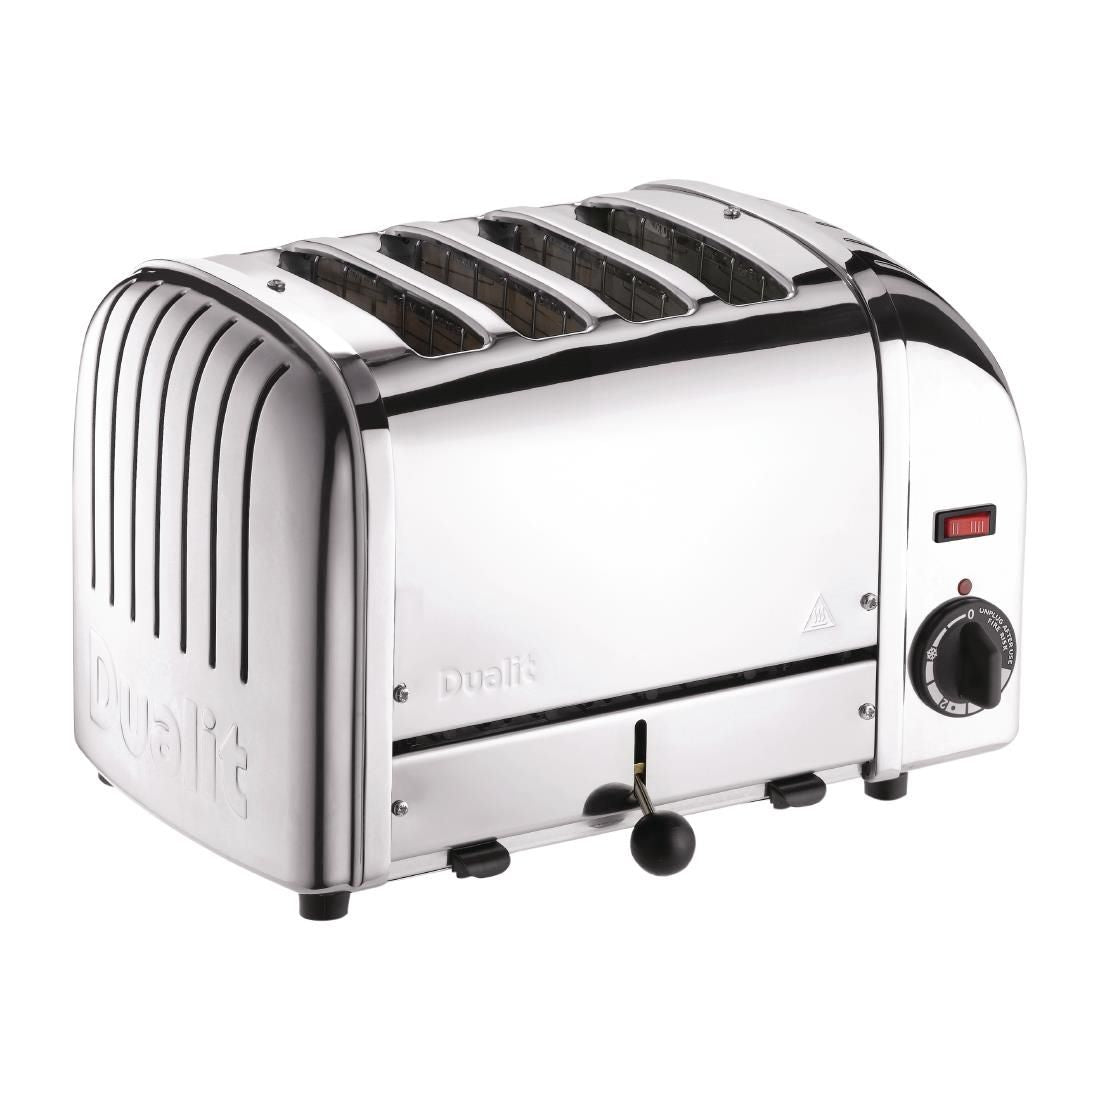 Dualit 4 Slice Vario Toaster Stainless 40352 JD Catering Equipment Solutions Ltd